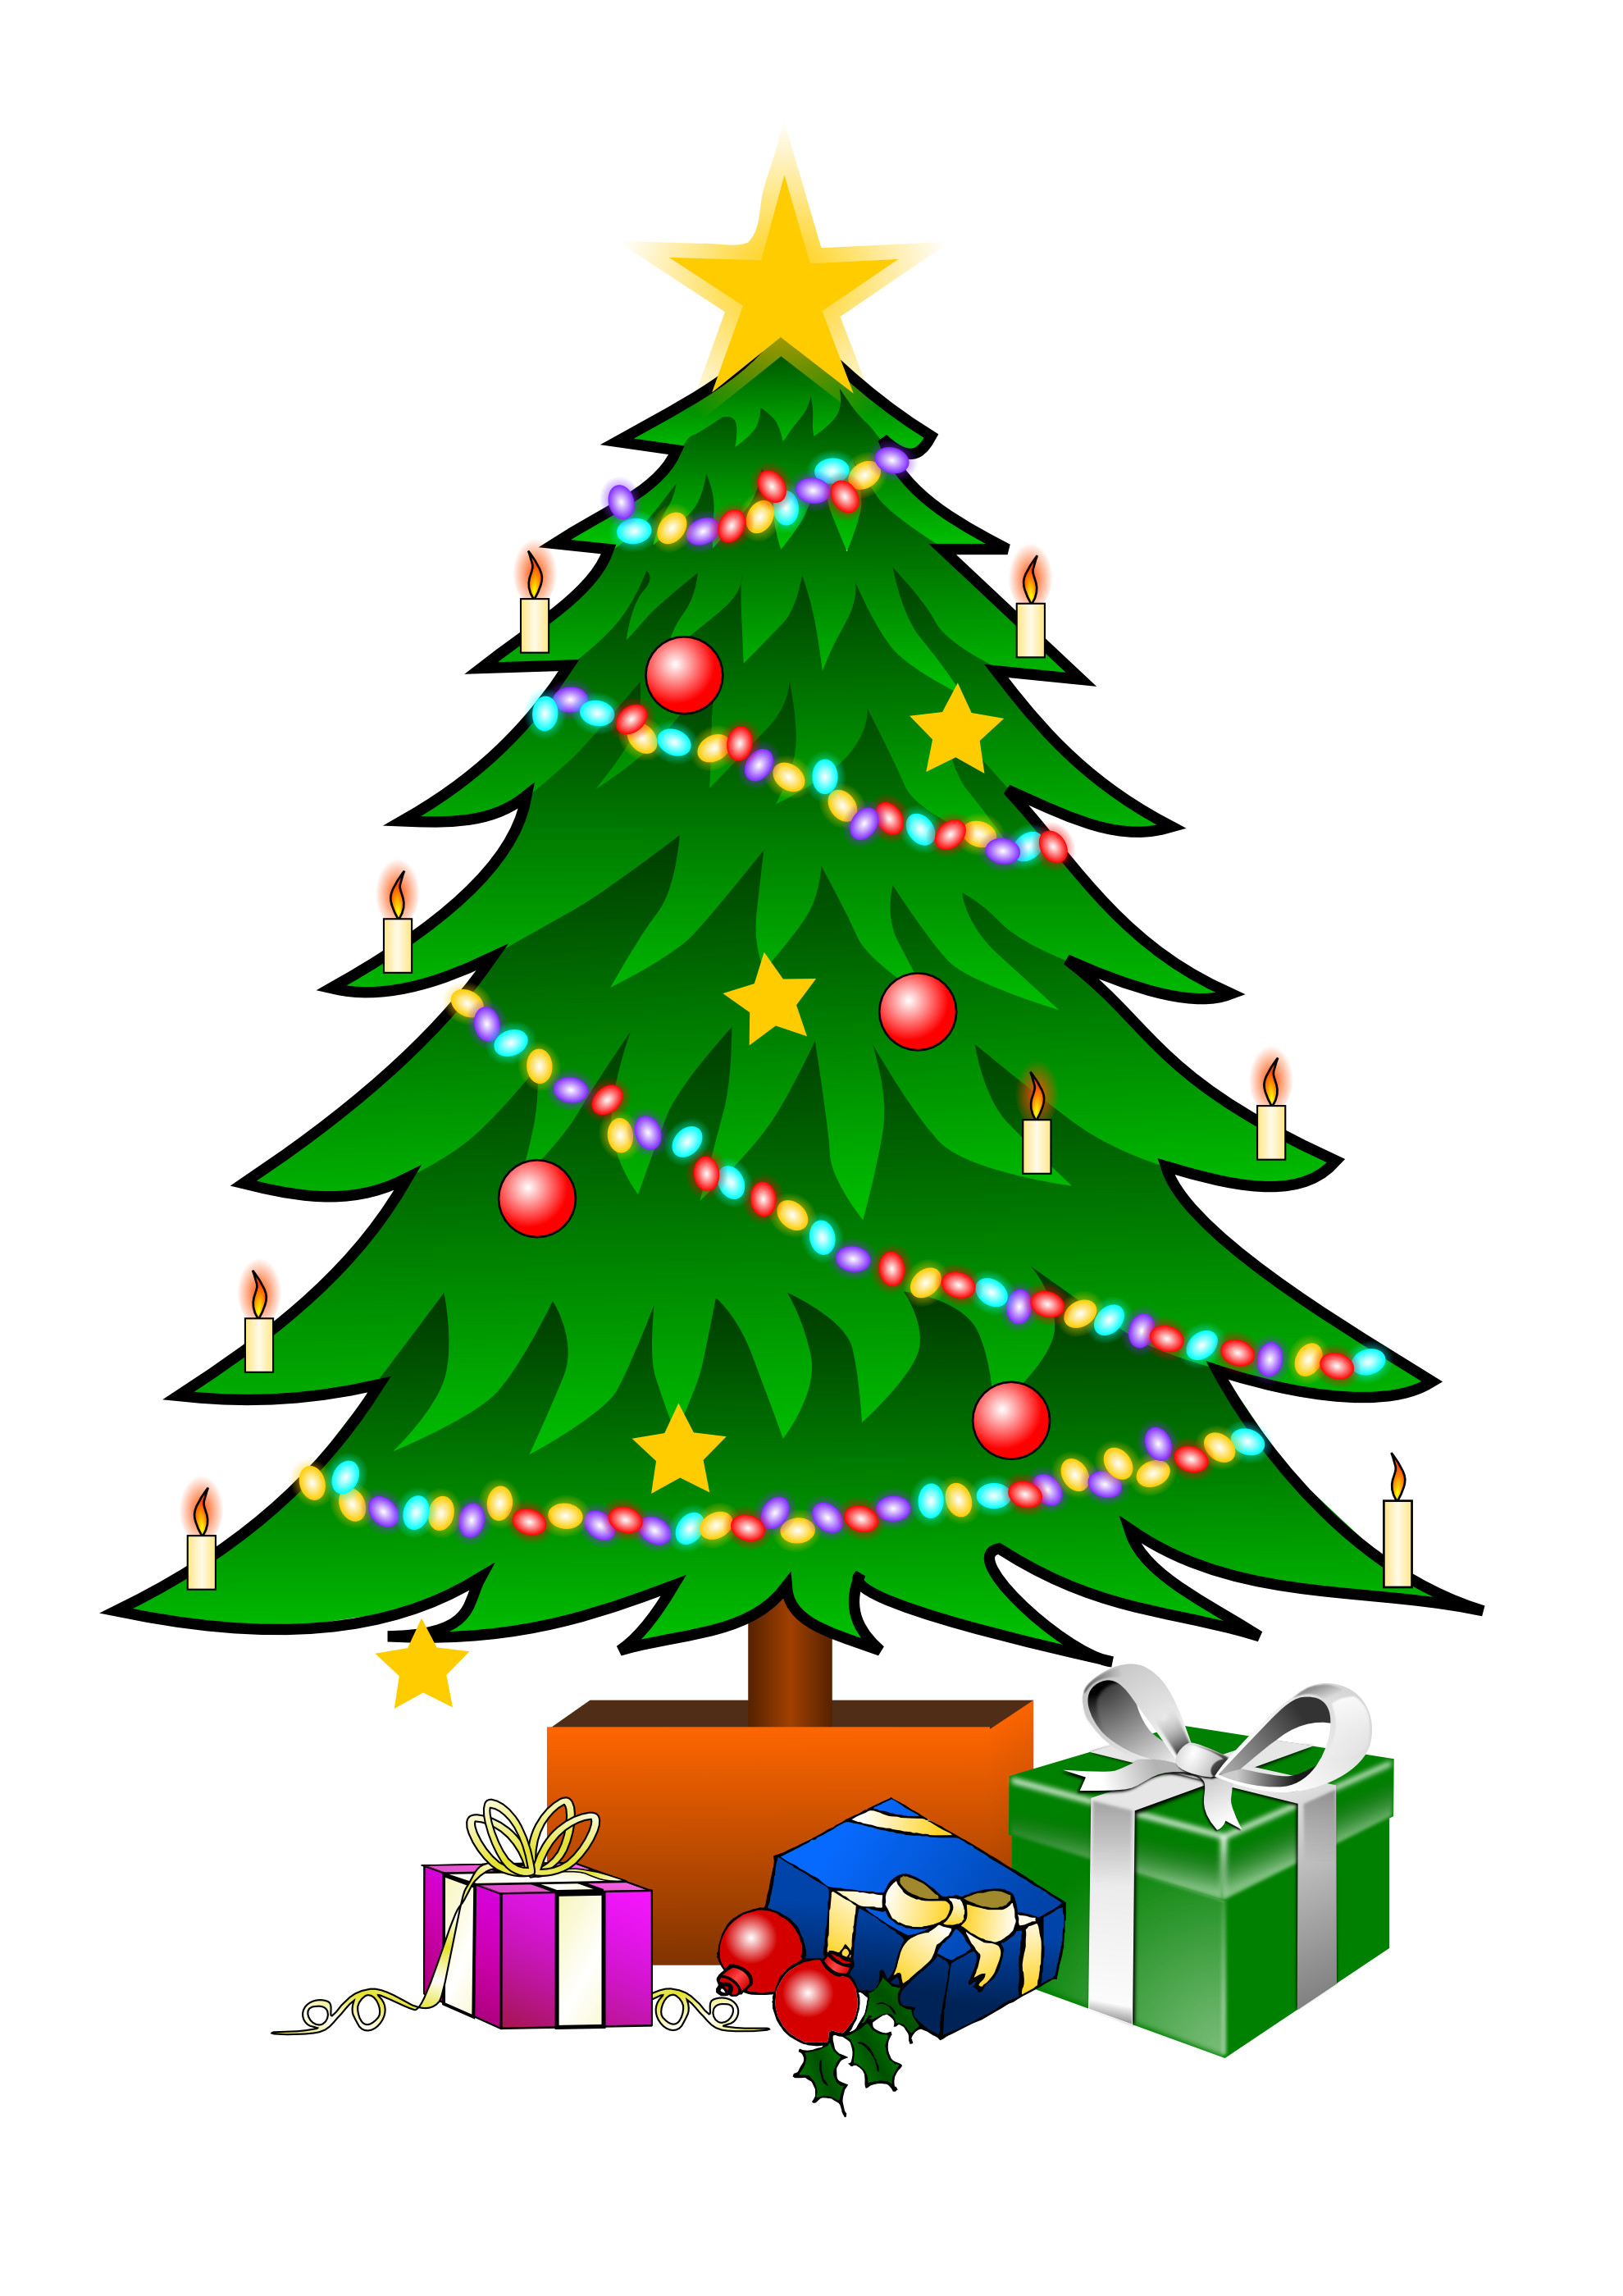 Christmas Tree Png - Christmas Tree Png Image #31869, Transparent background PNG HD thumbnail